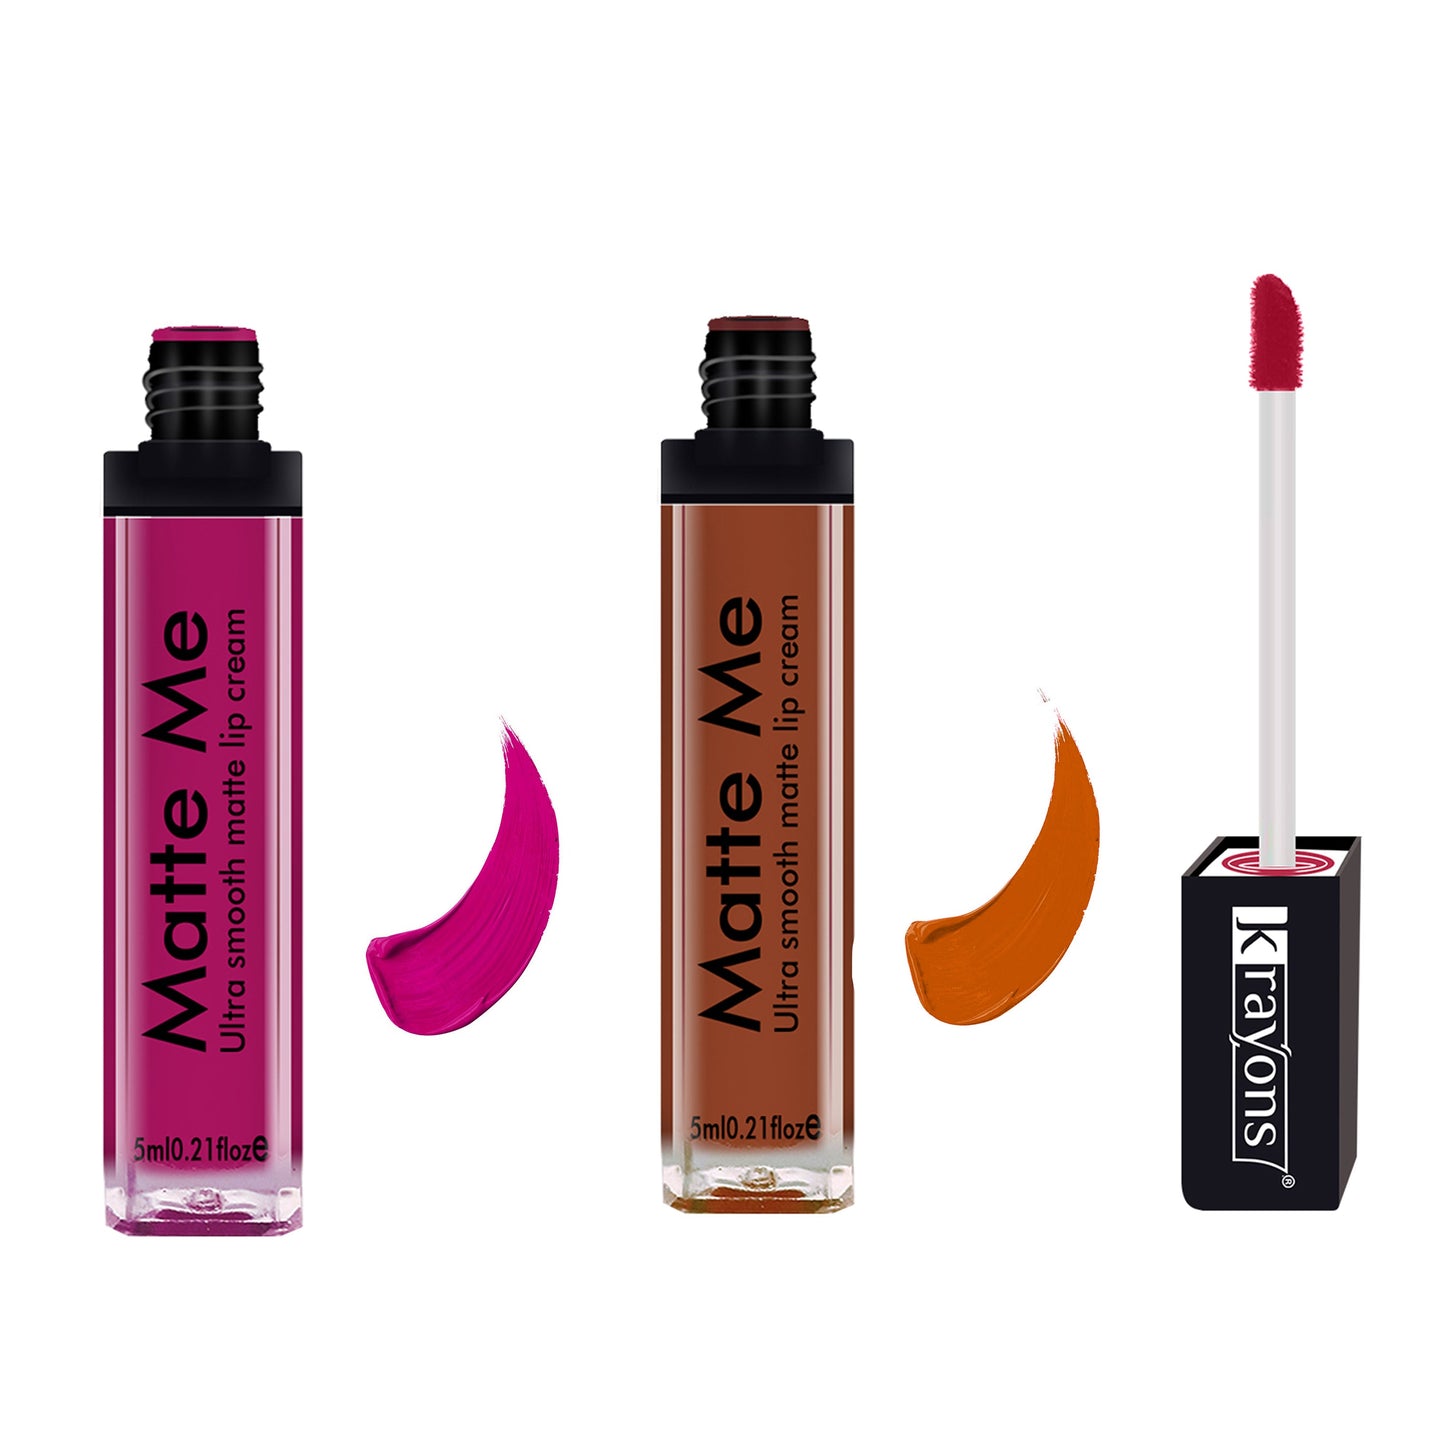 Krayons Matte Me Ultra Smooth Matte Liquid Lip Color, Mask Proof, Waterproof, Longlasting, 5ml Each, Combo, Pack of 2 (Pink Fever, Coffee Creme)